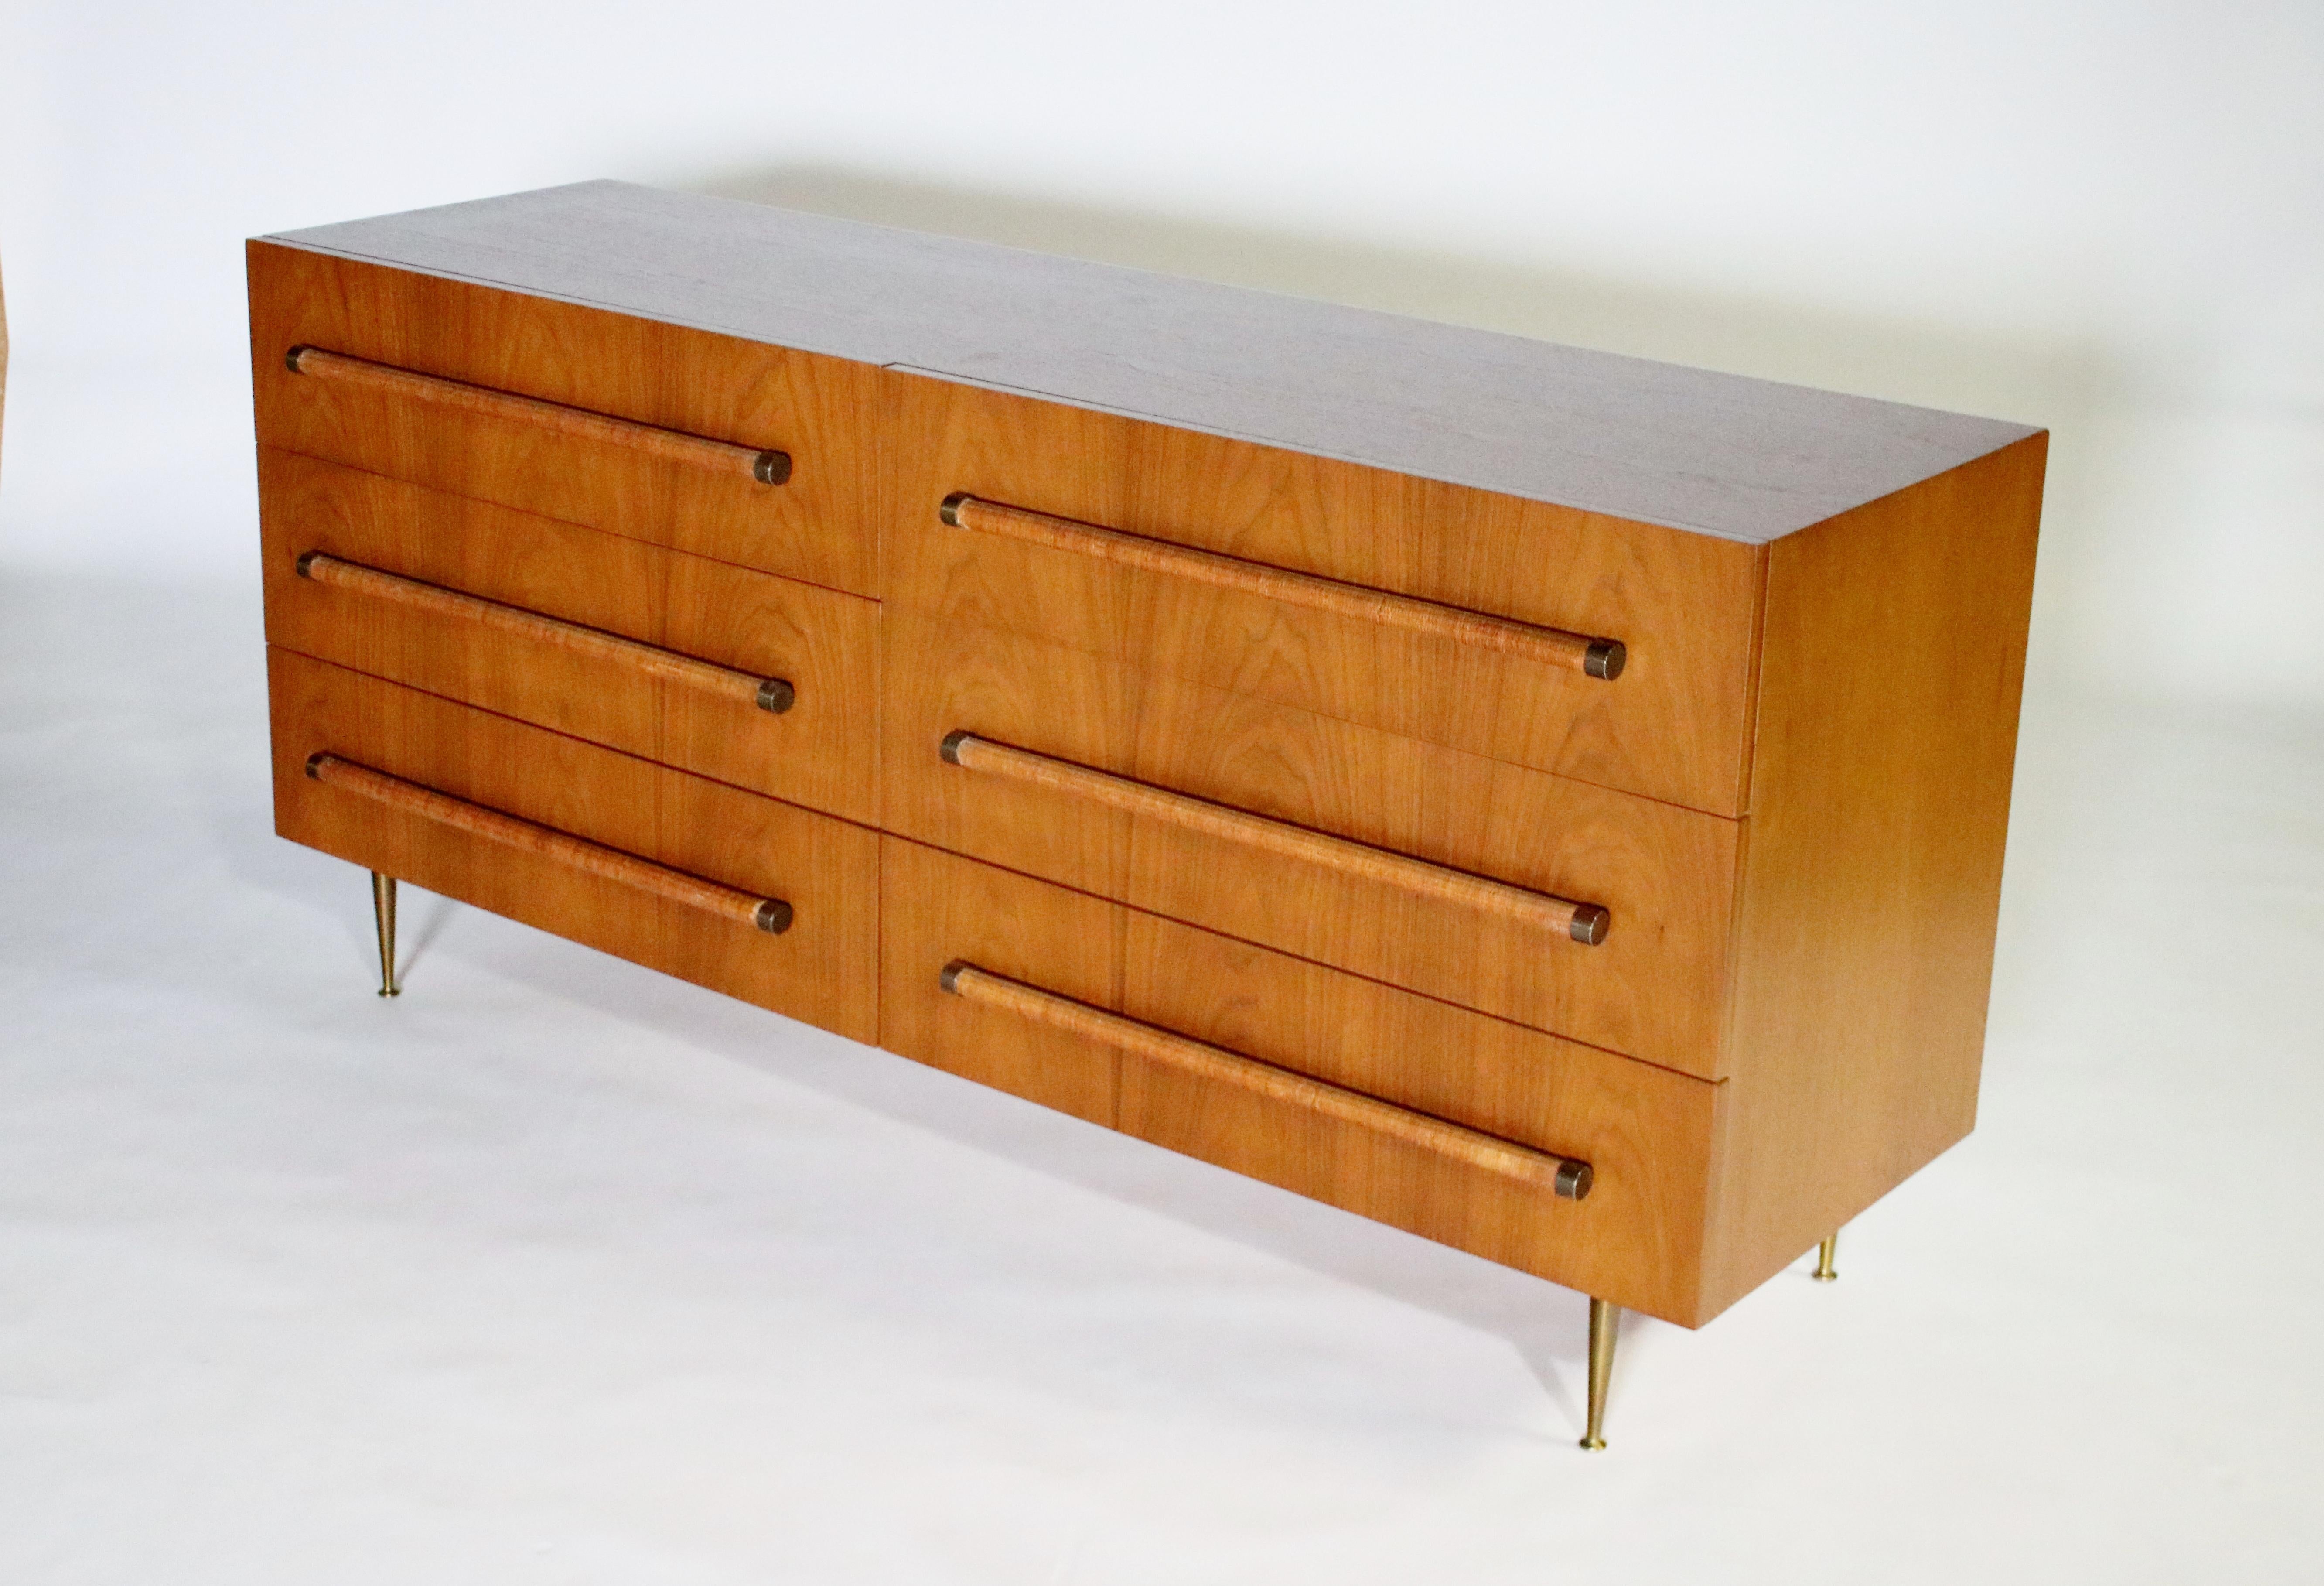 6-drawer dresser designed by T.H. Robsjohn Gibbiings for Widdicomb in beautifully restored walnut with all original brass legs, hardware and rattan pulls. Interior drawers include factory compartment interchangeable organizers and pull-out trays.